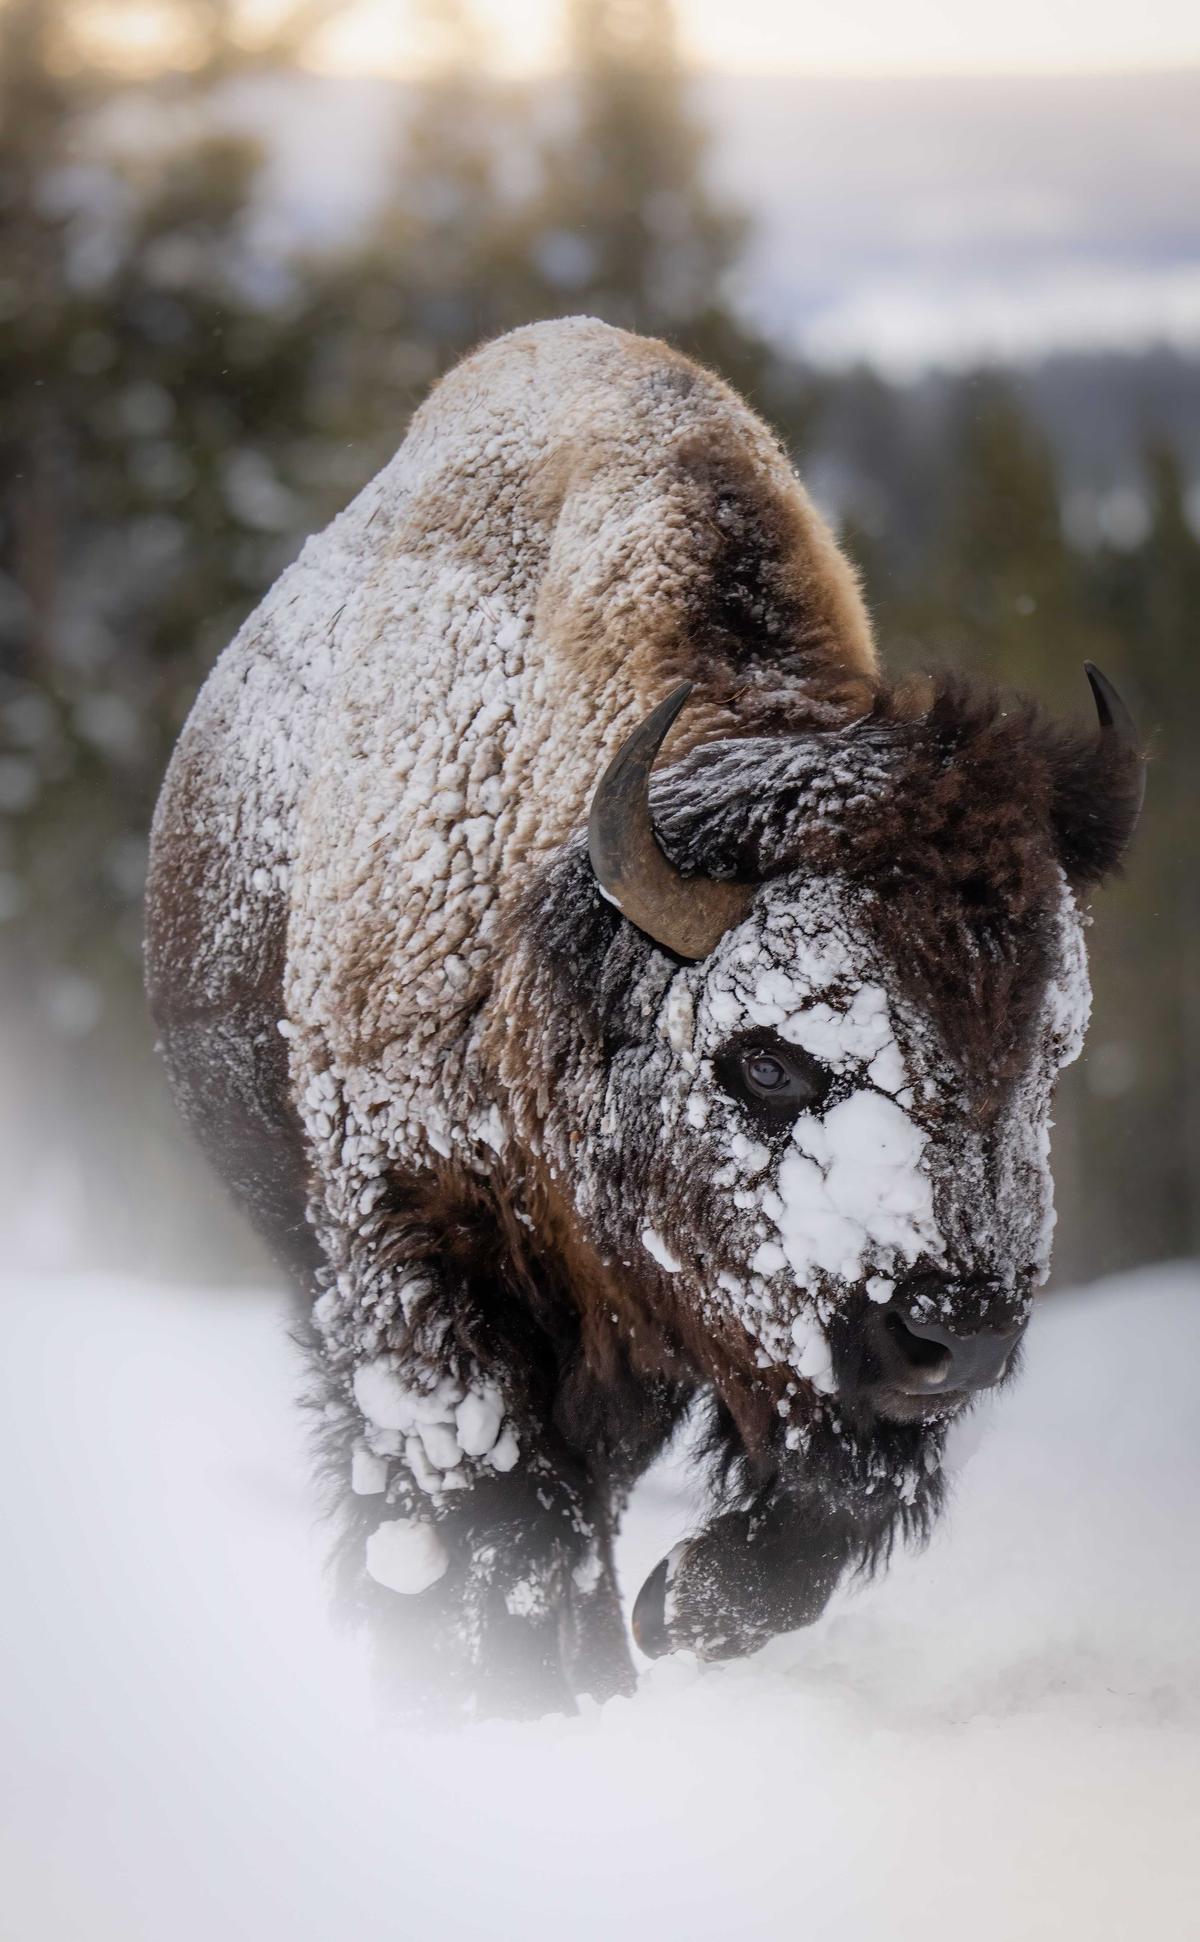 A bison photographed by Mike Darter of the U.S. (Courtesy of Mike Darter/World Nature Photography Award)